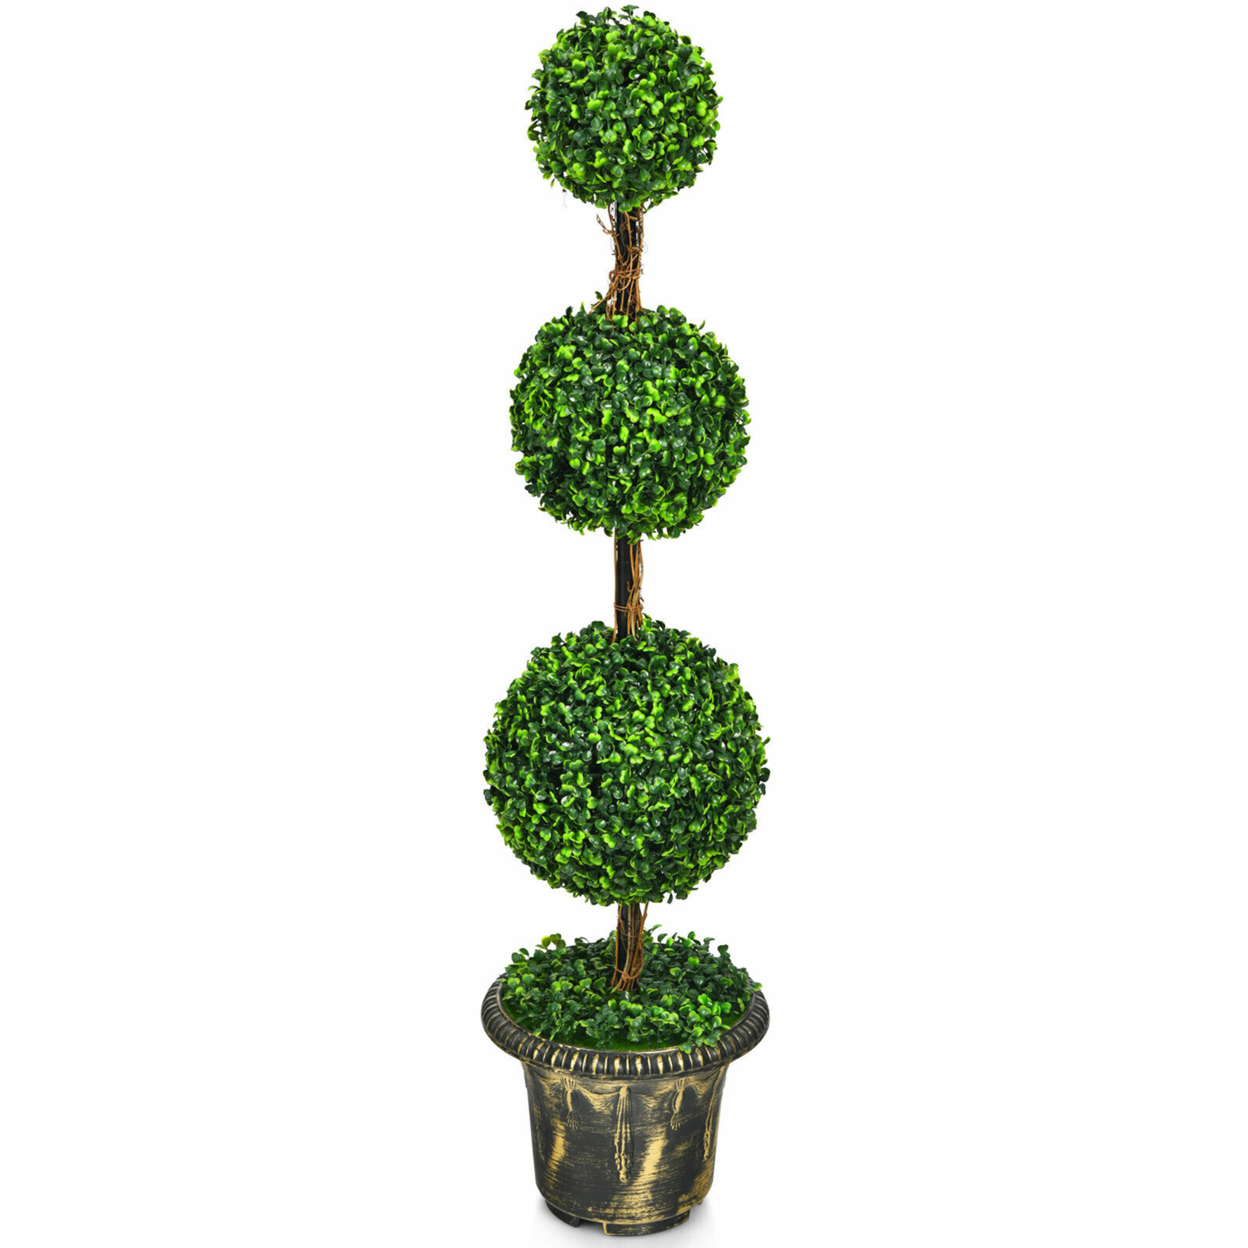 4 Ft Artificial Triple Ball Topiary Tree Greenery Plant Home Office Decor